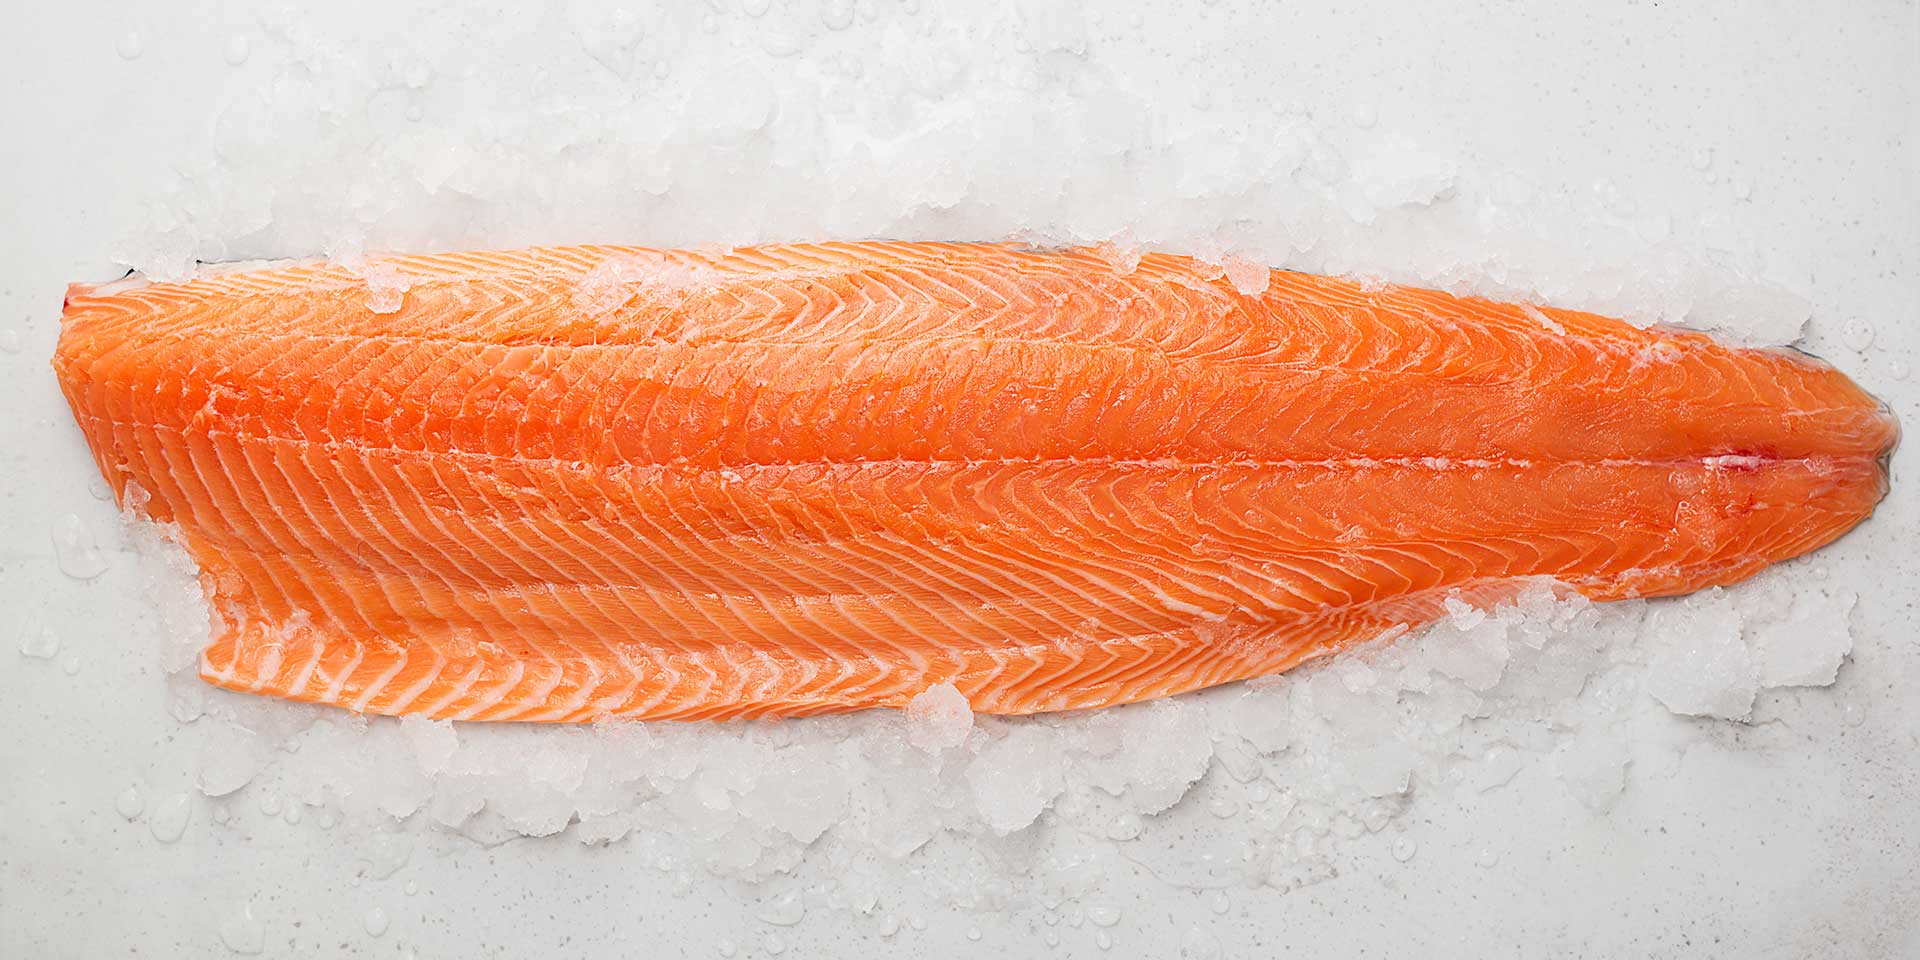 4 Tips for Buying Wild Salmon - FoodPrint